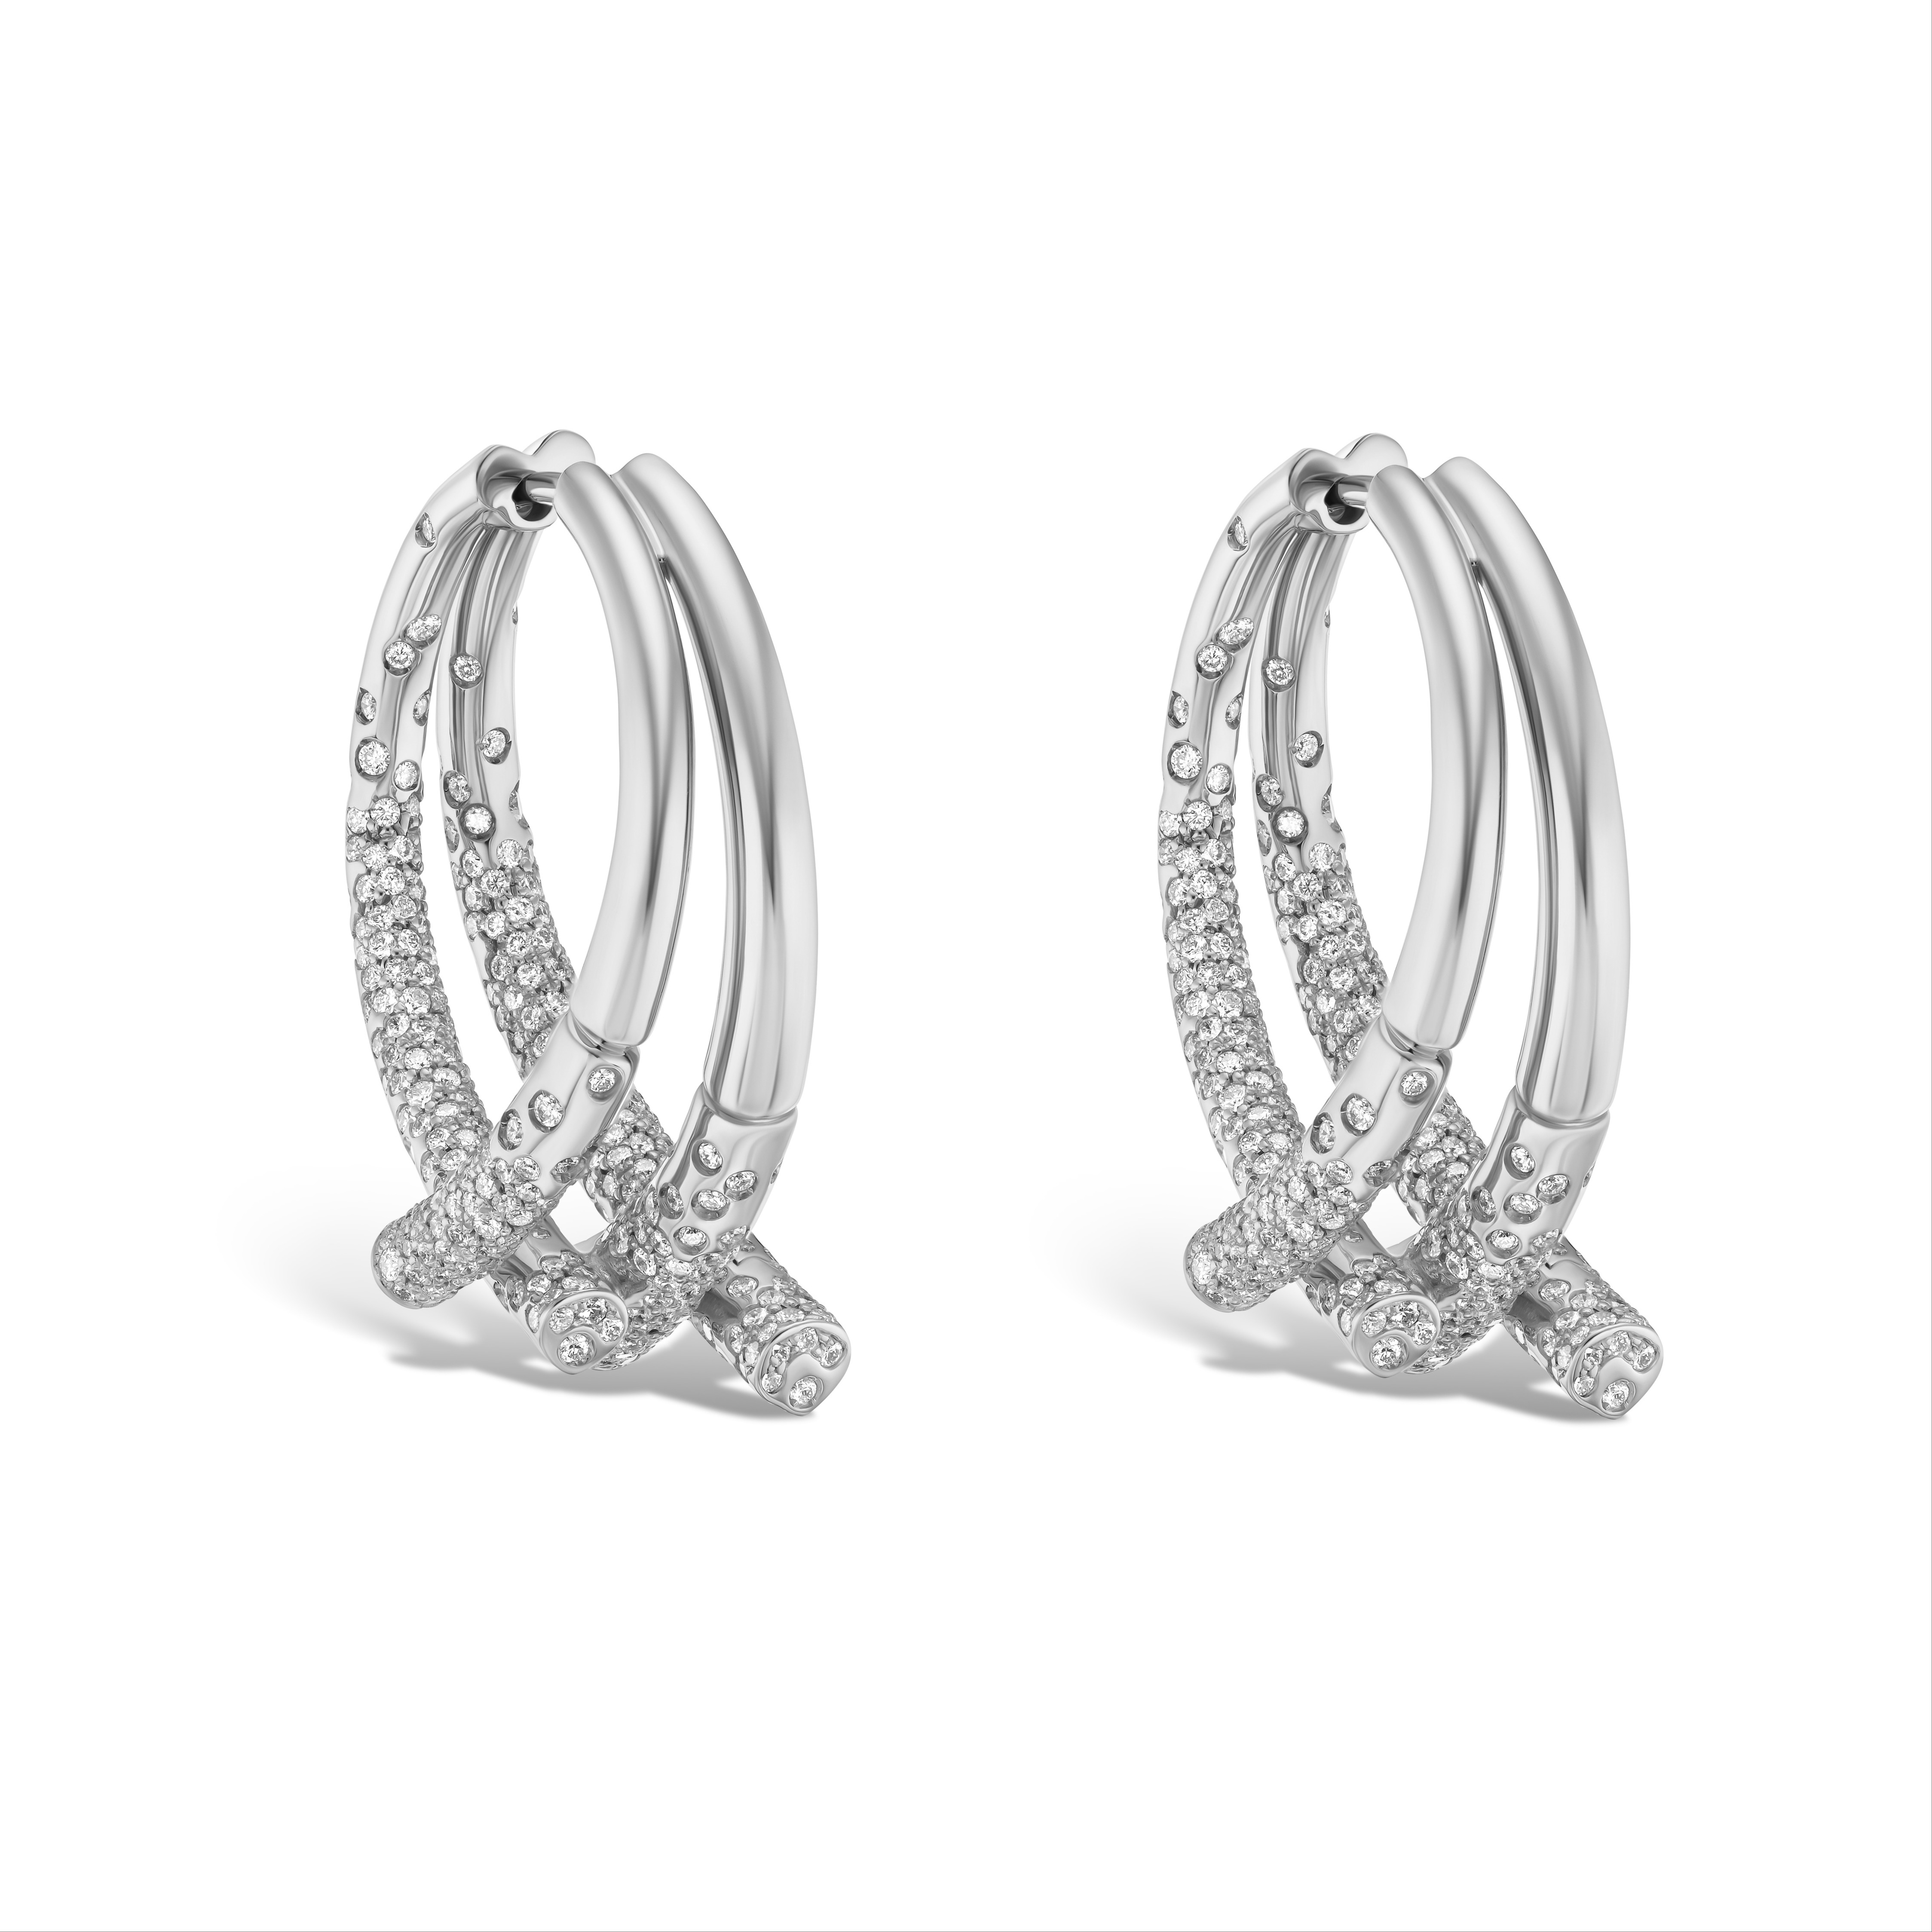 OERA EARRINGS. White gold, paved with diamonds. Duo-orb version 75